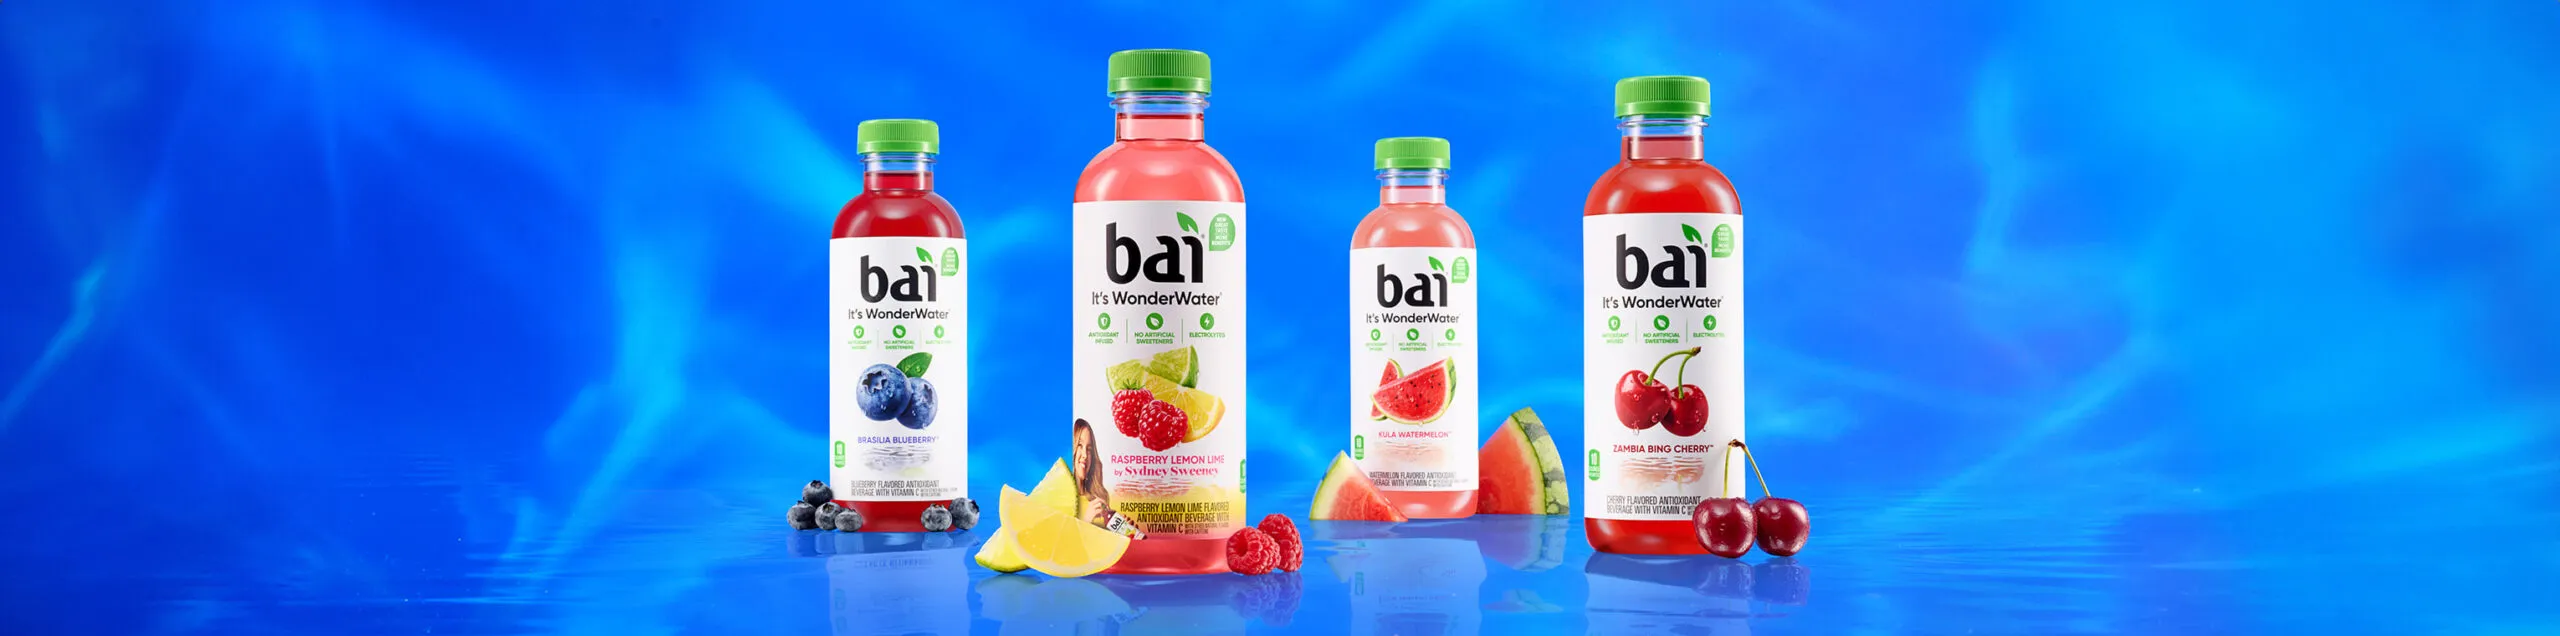 Bai® Flavors Variety Pack (Available at Club)